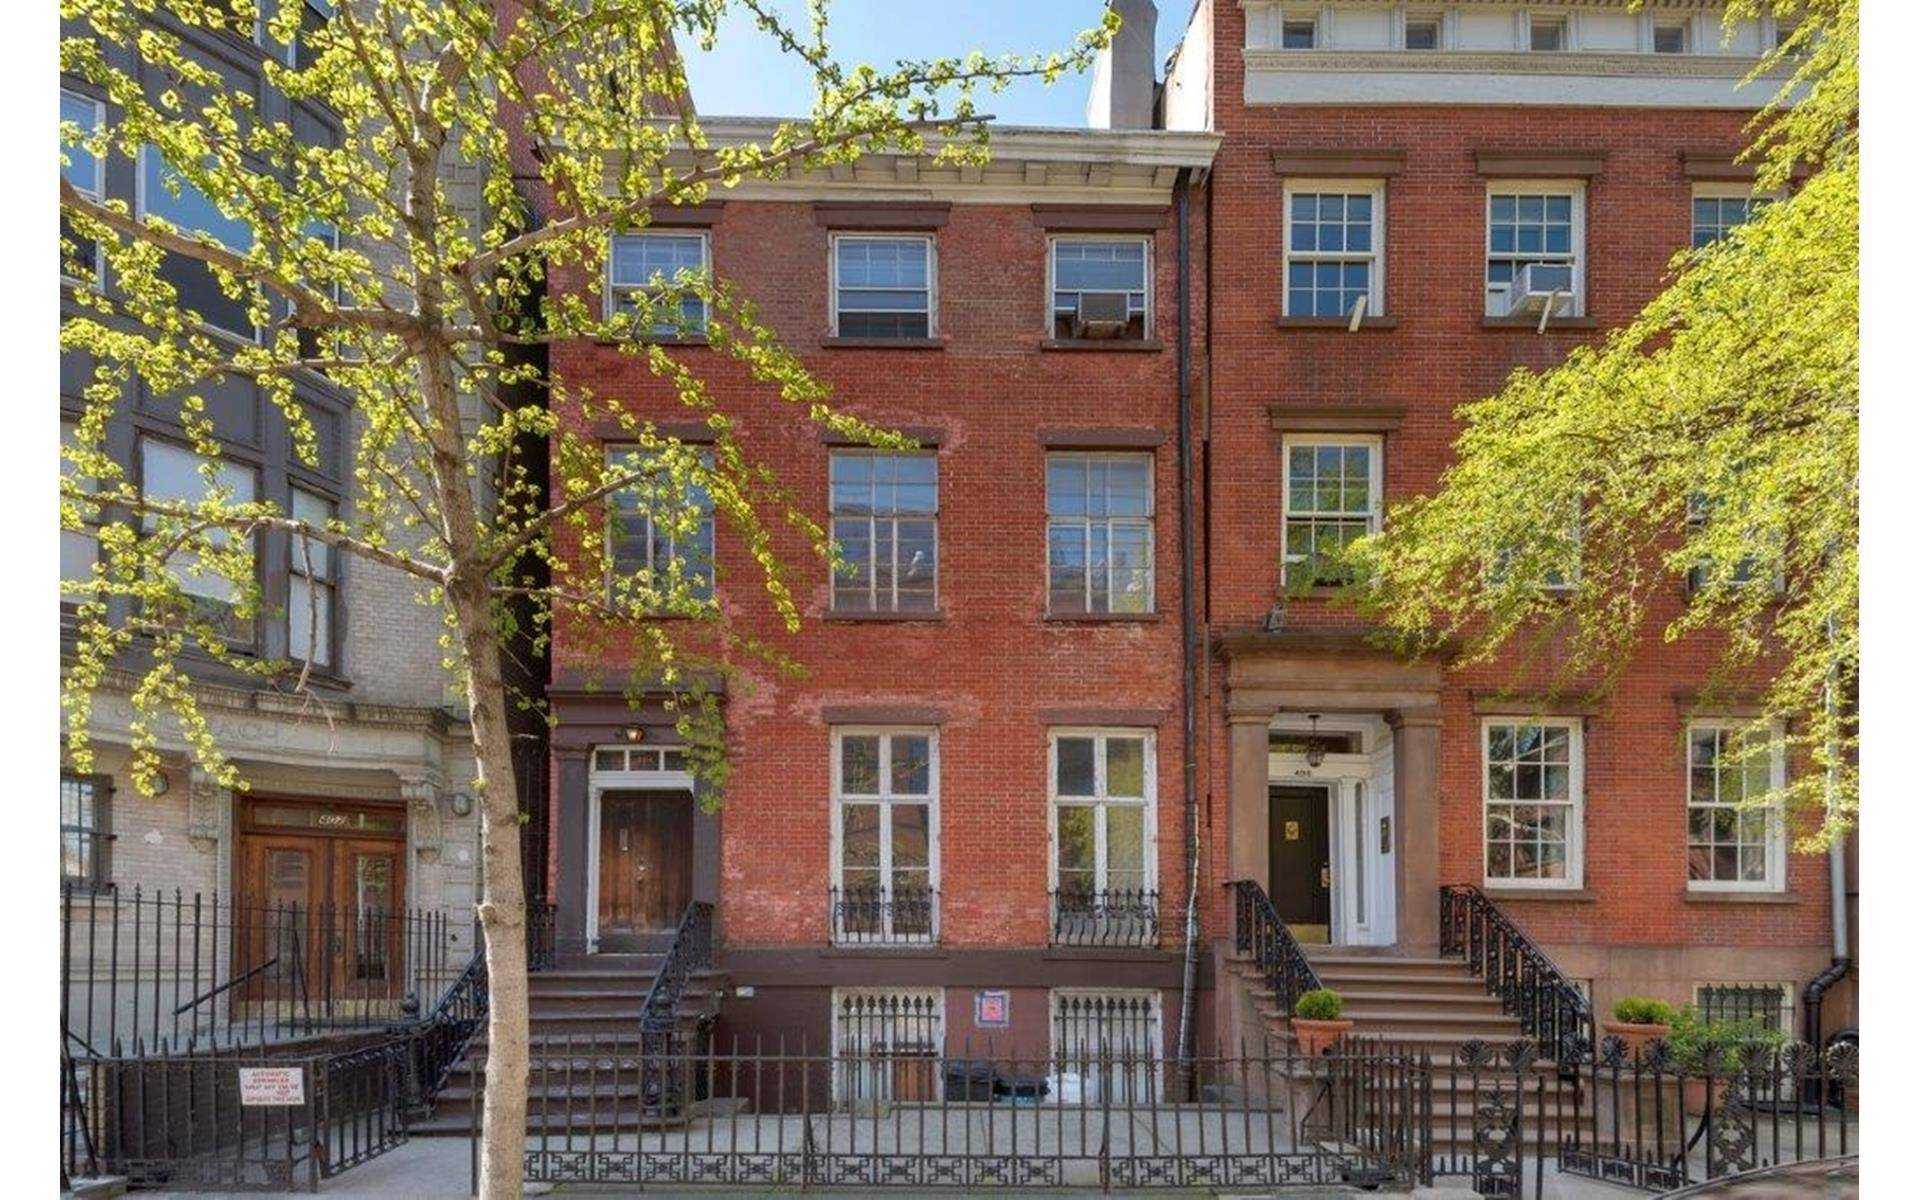 404 West 20th Street is officially acknowledged as the Oldest Dwelling within the Chelsea Historic District, as the plaque next to the front door states.